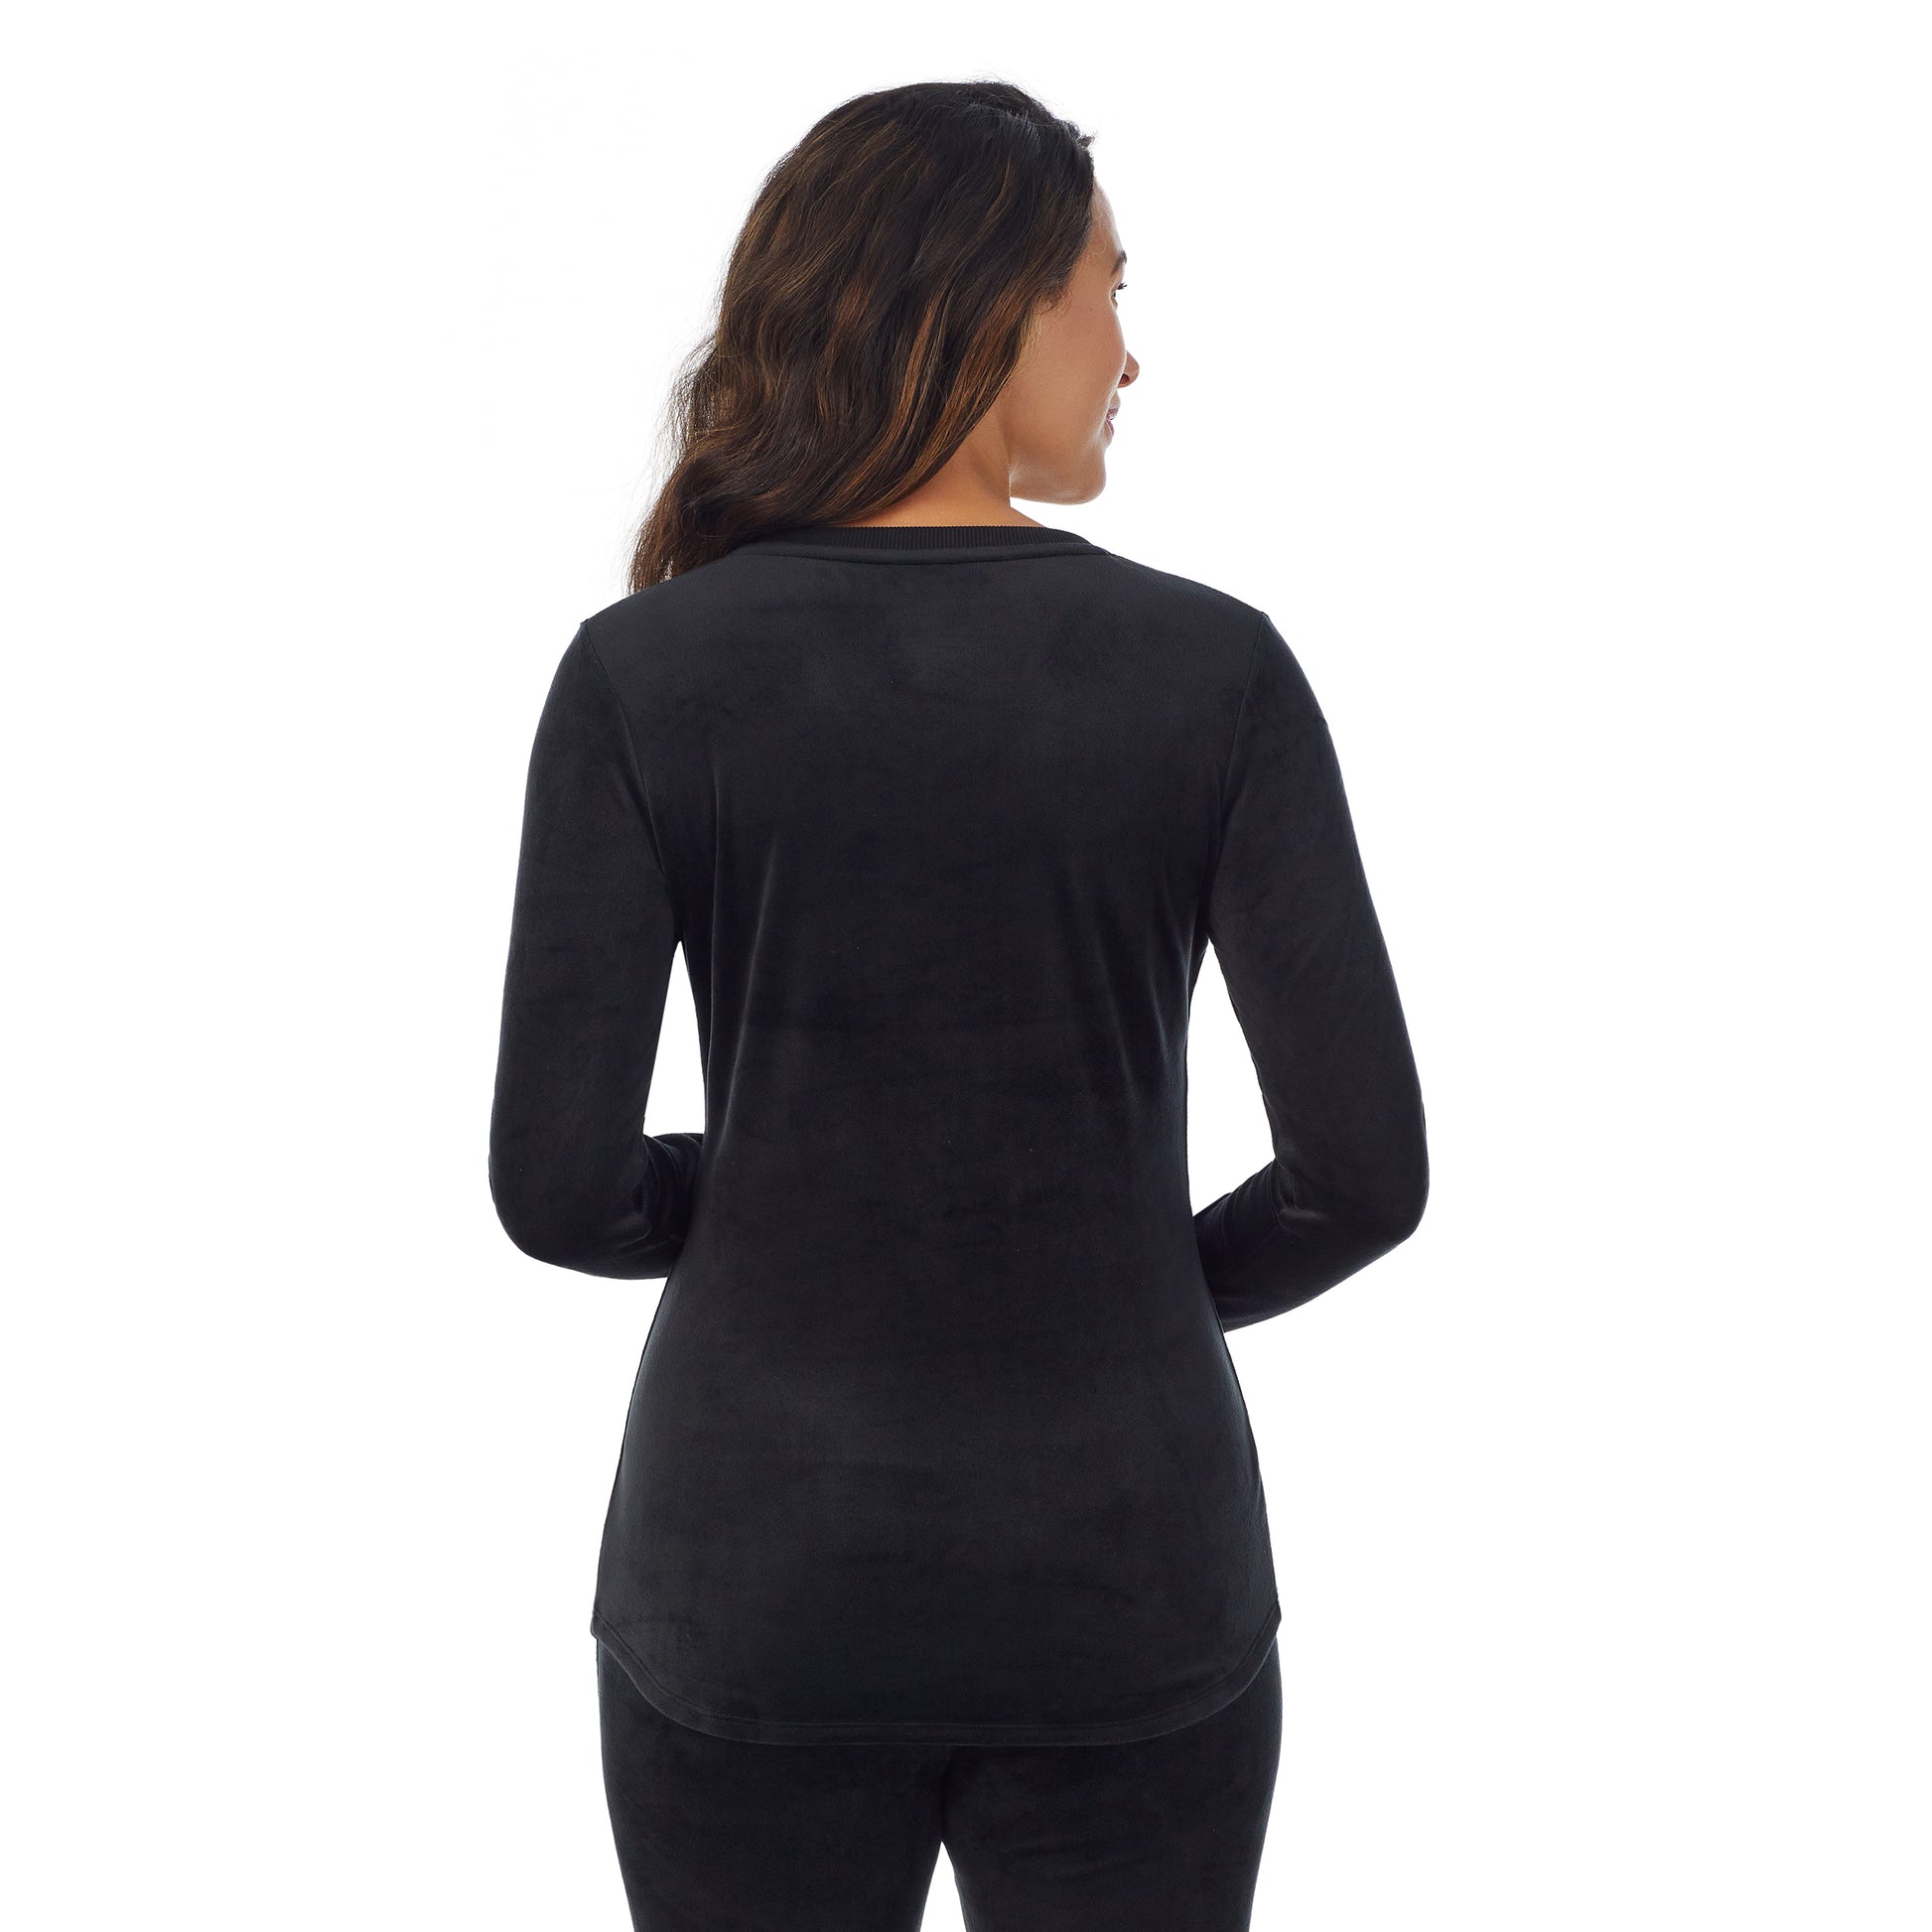 Black; Model is wearing size S. She is 5'8", Bust 34", Waist 26”, Hips 36"@A lady wearing black stretch velour long sleeve v-neck